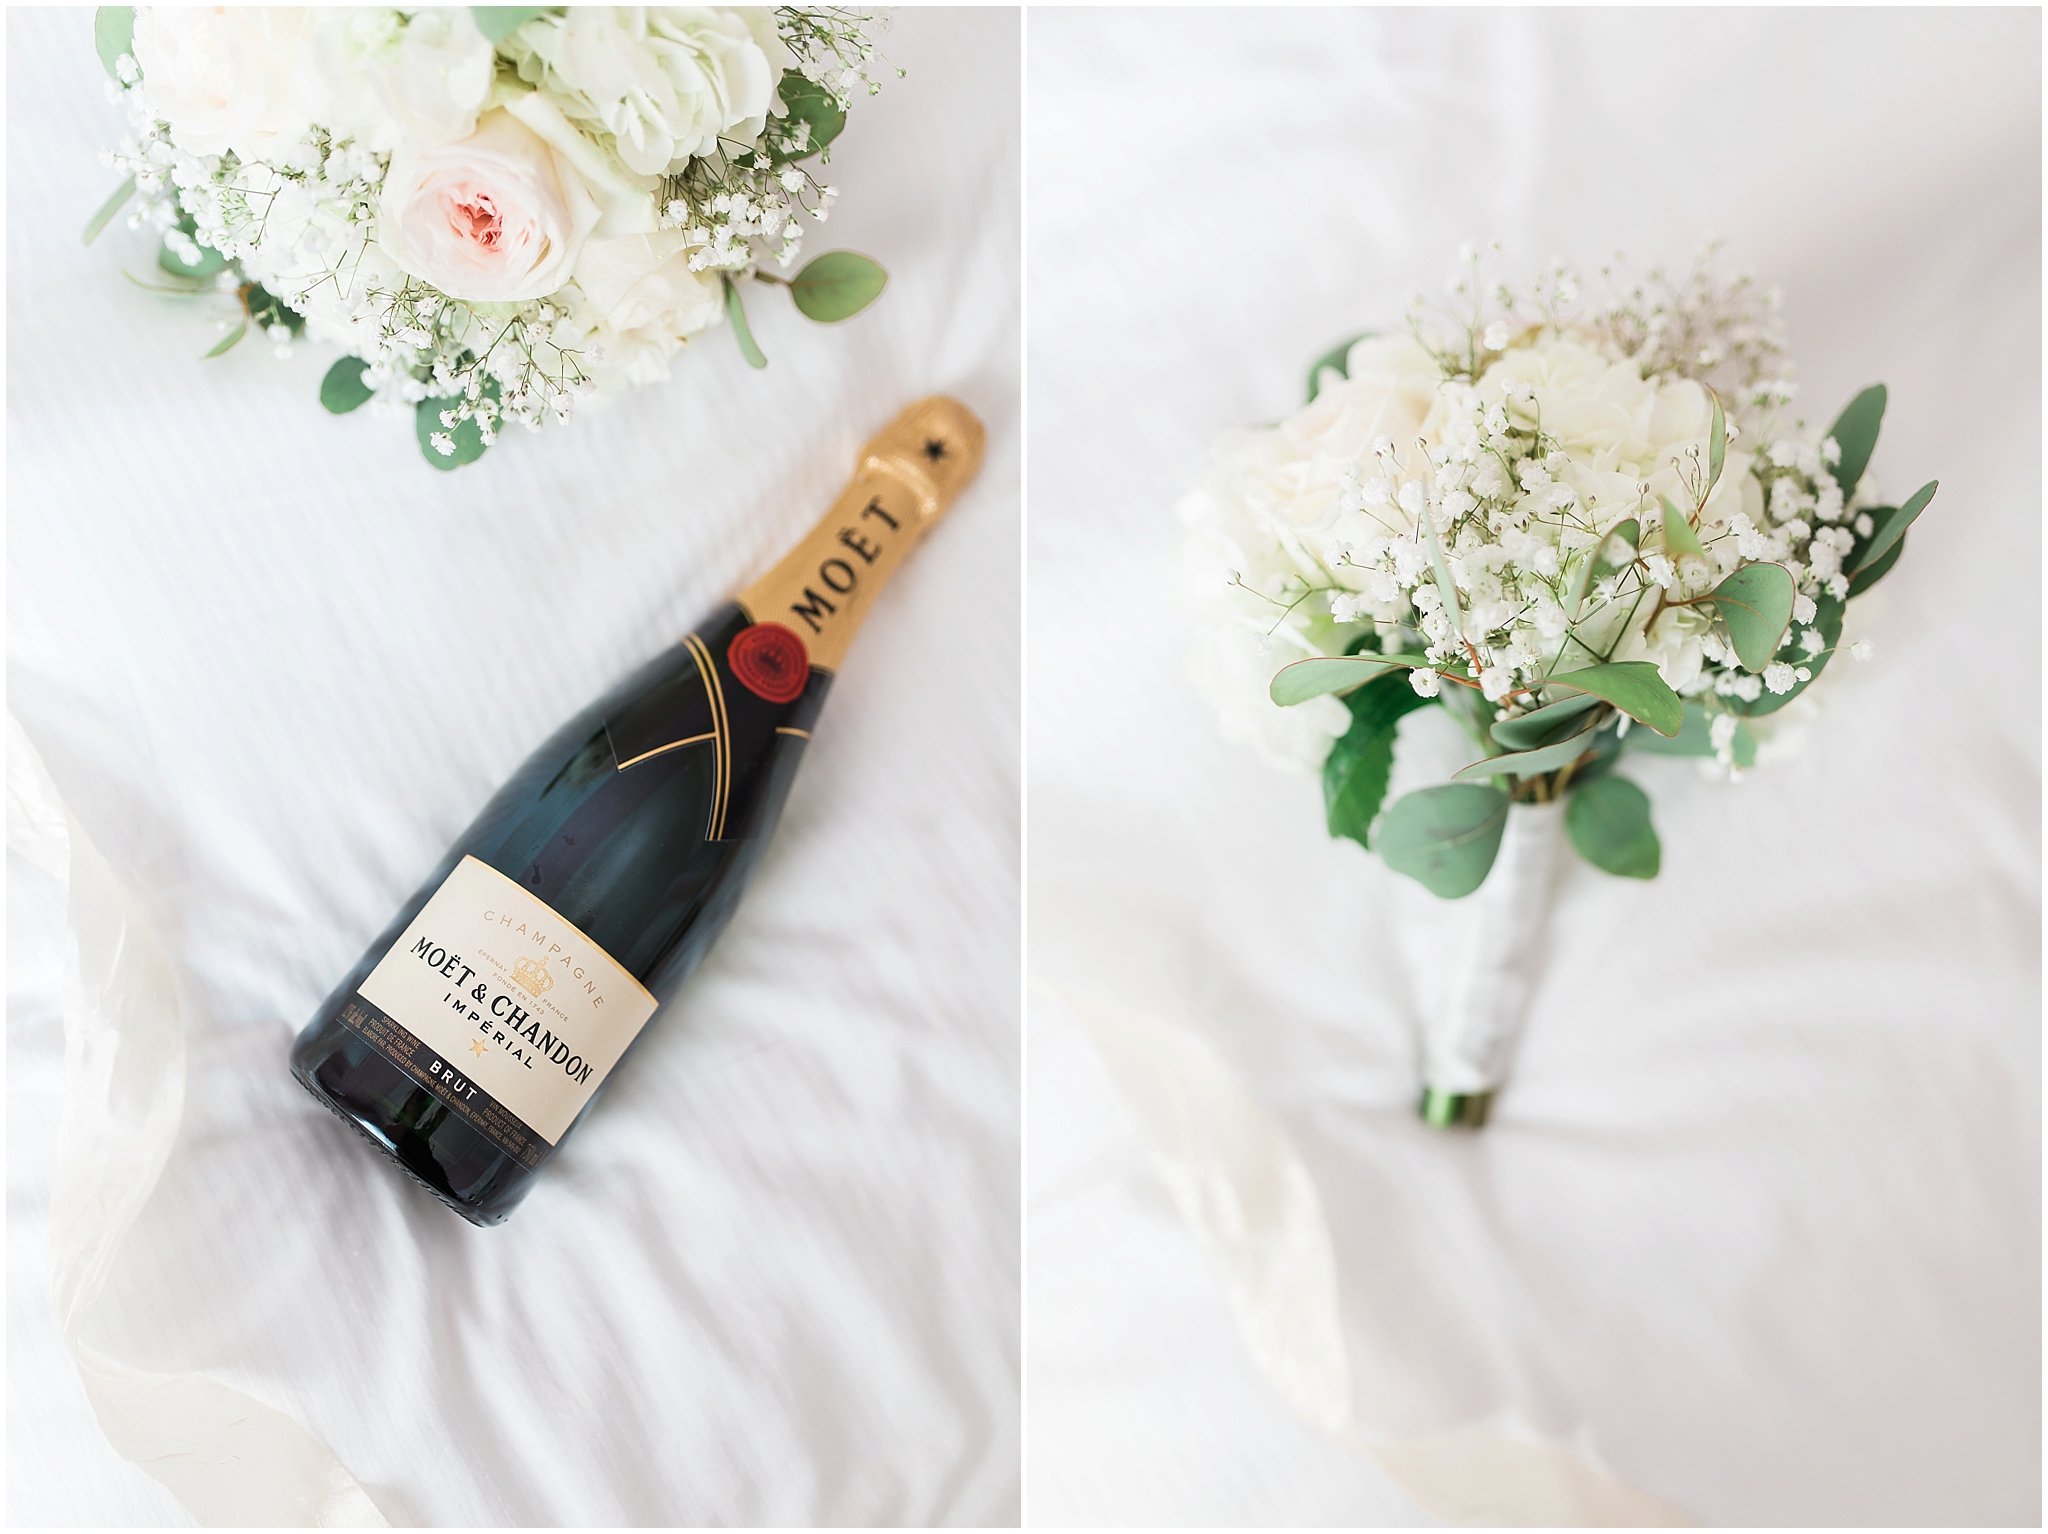 Romantic Montreal flowers and champagne